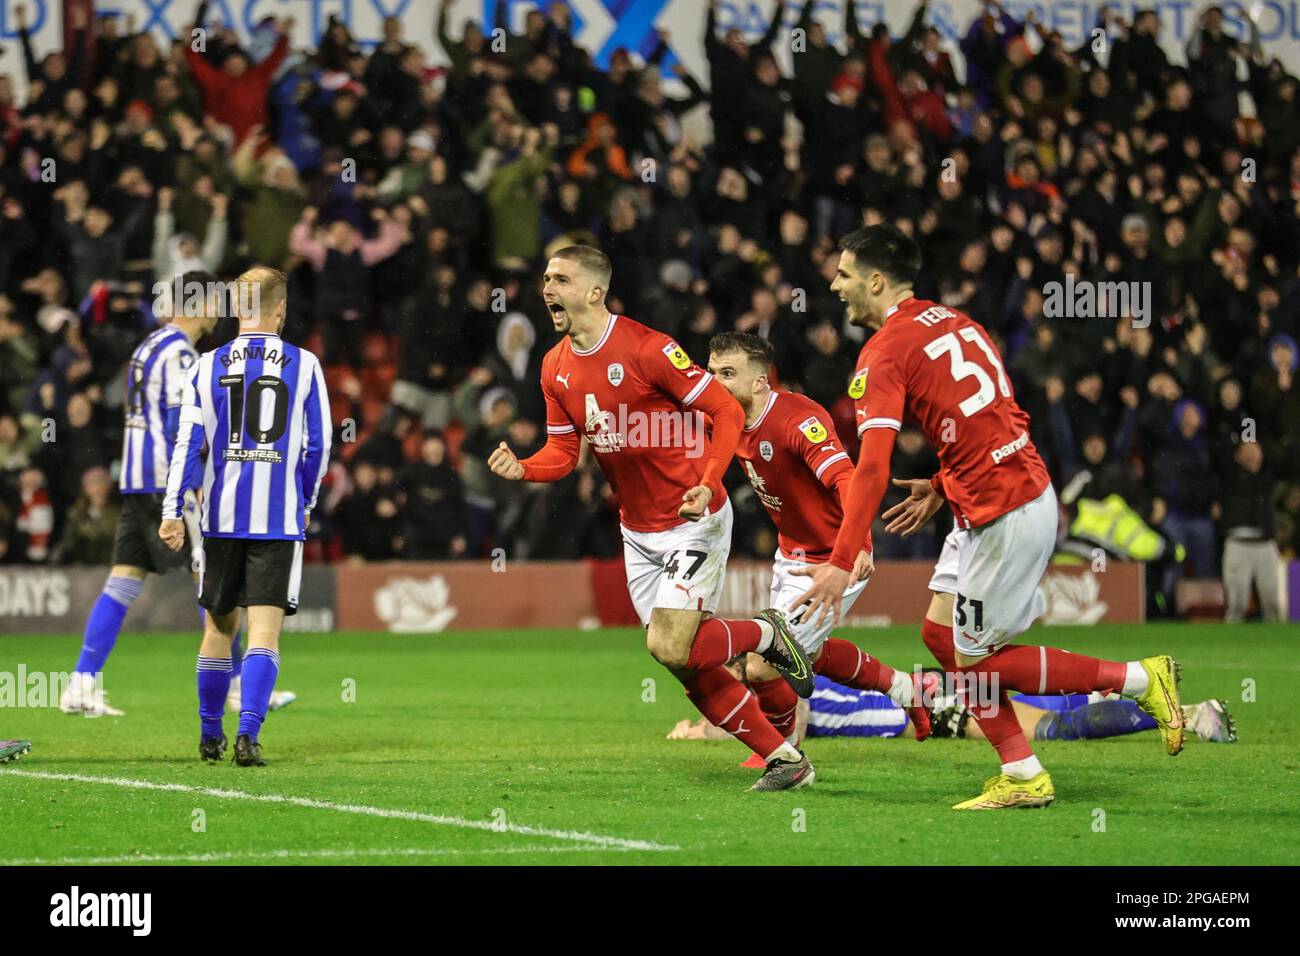 Max Watters #47 of Barnsley celebrates his goal to make it 3-2 during the Sky Bet League 1 match Barnsley vs Sheffield Wednesday at Oakwell, Barnsley, United Kingdom, 21st March 2023  (Photo by Mark Cosgrove/News Images) Stock Photo